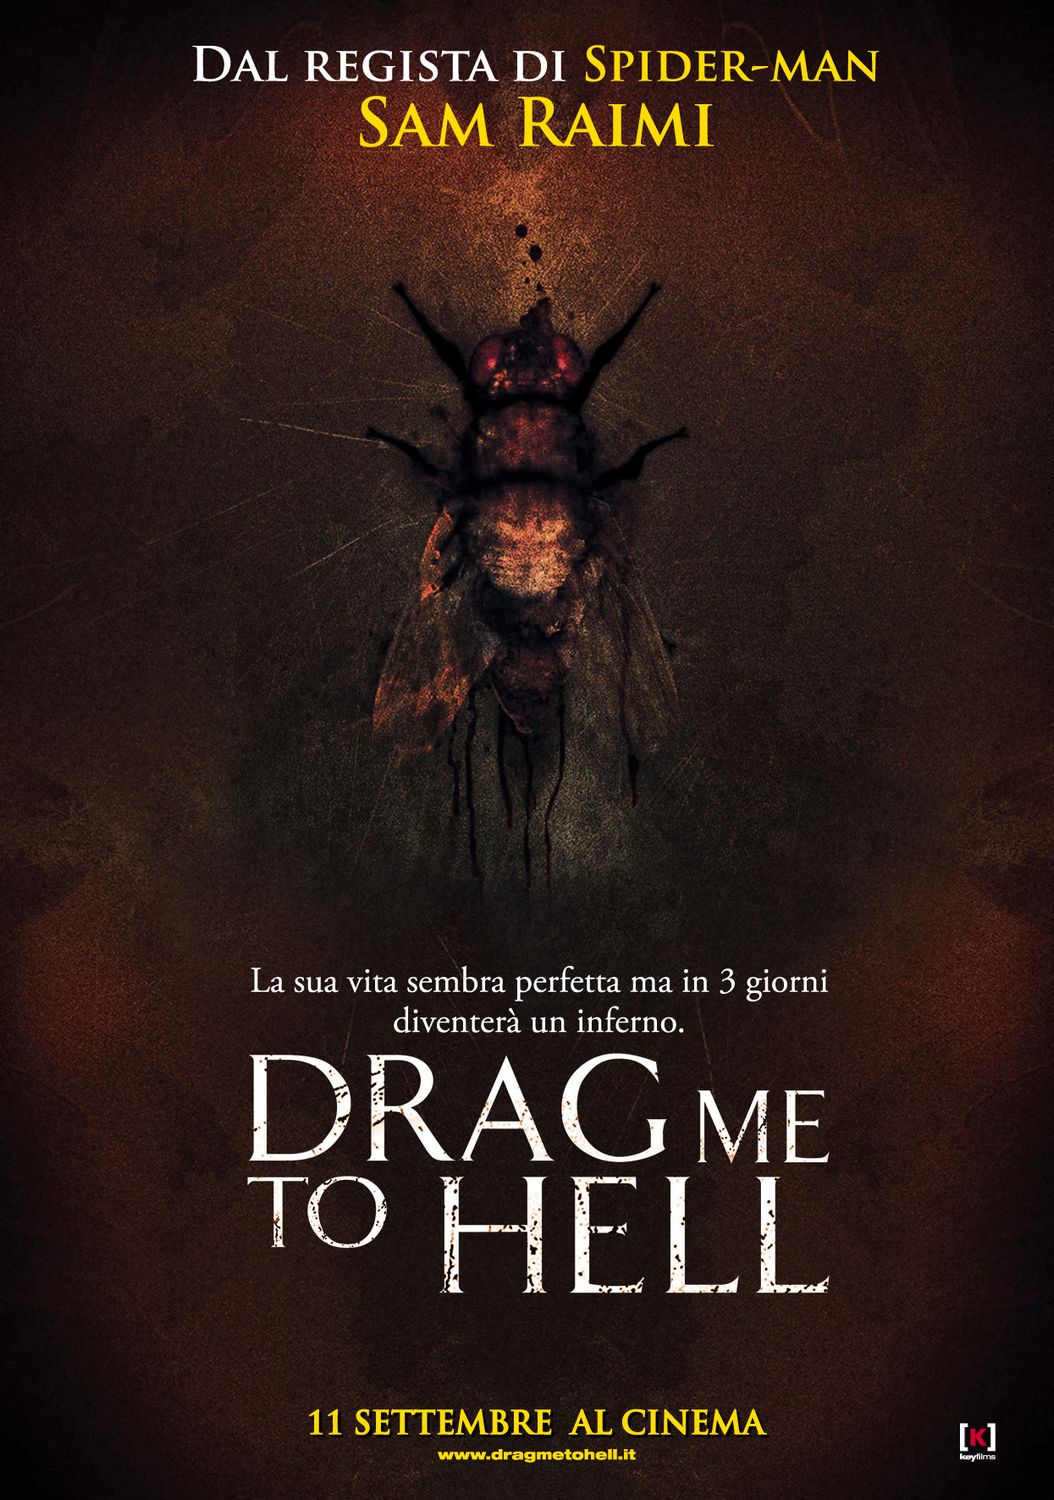 drag me to hell 2 film